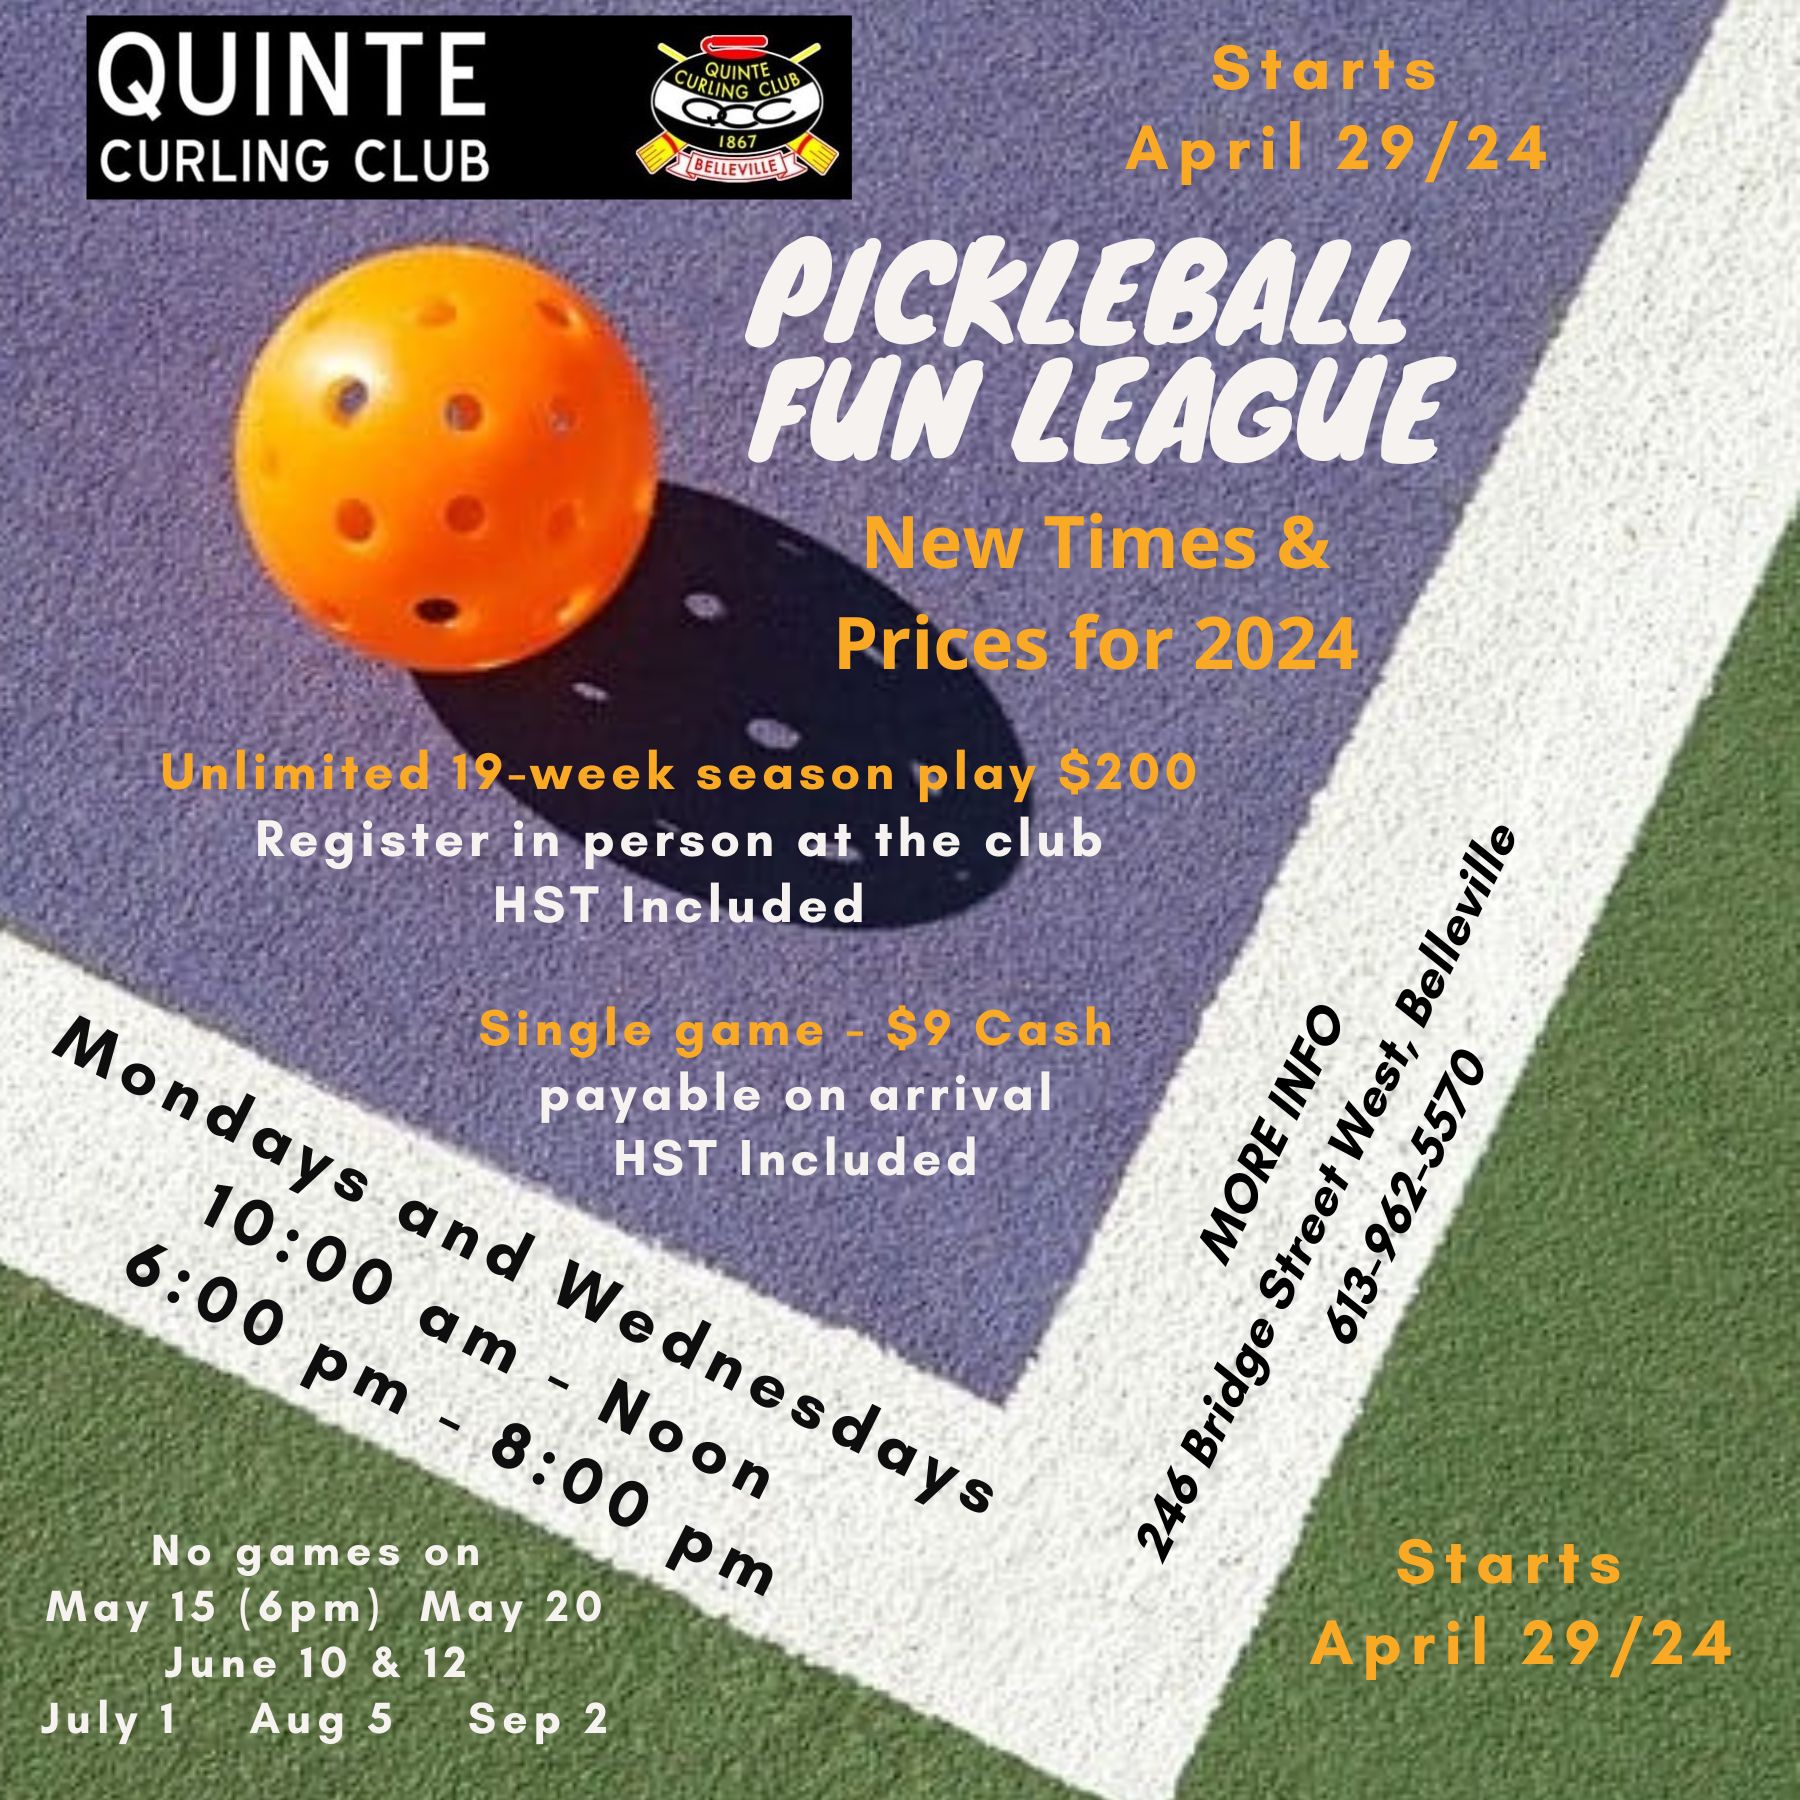 Poster titled "Pickleball Fun League" with event details on it. Has a picture of a pickleball on a court